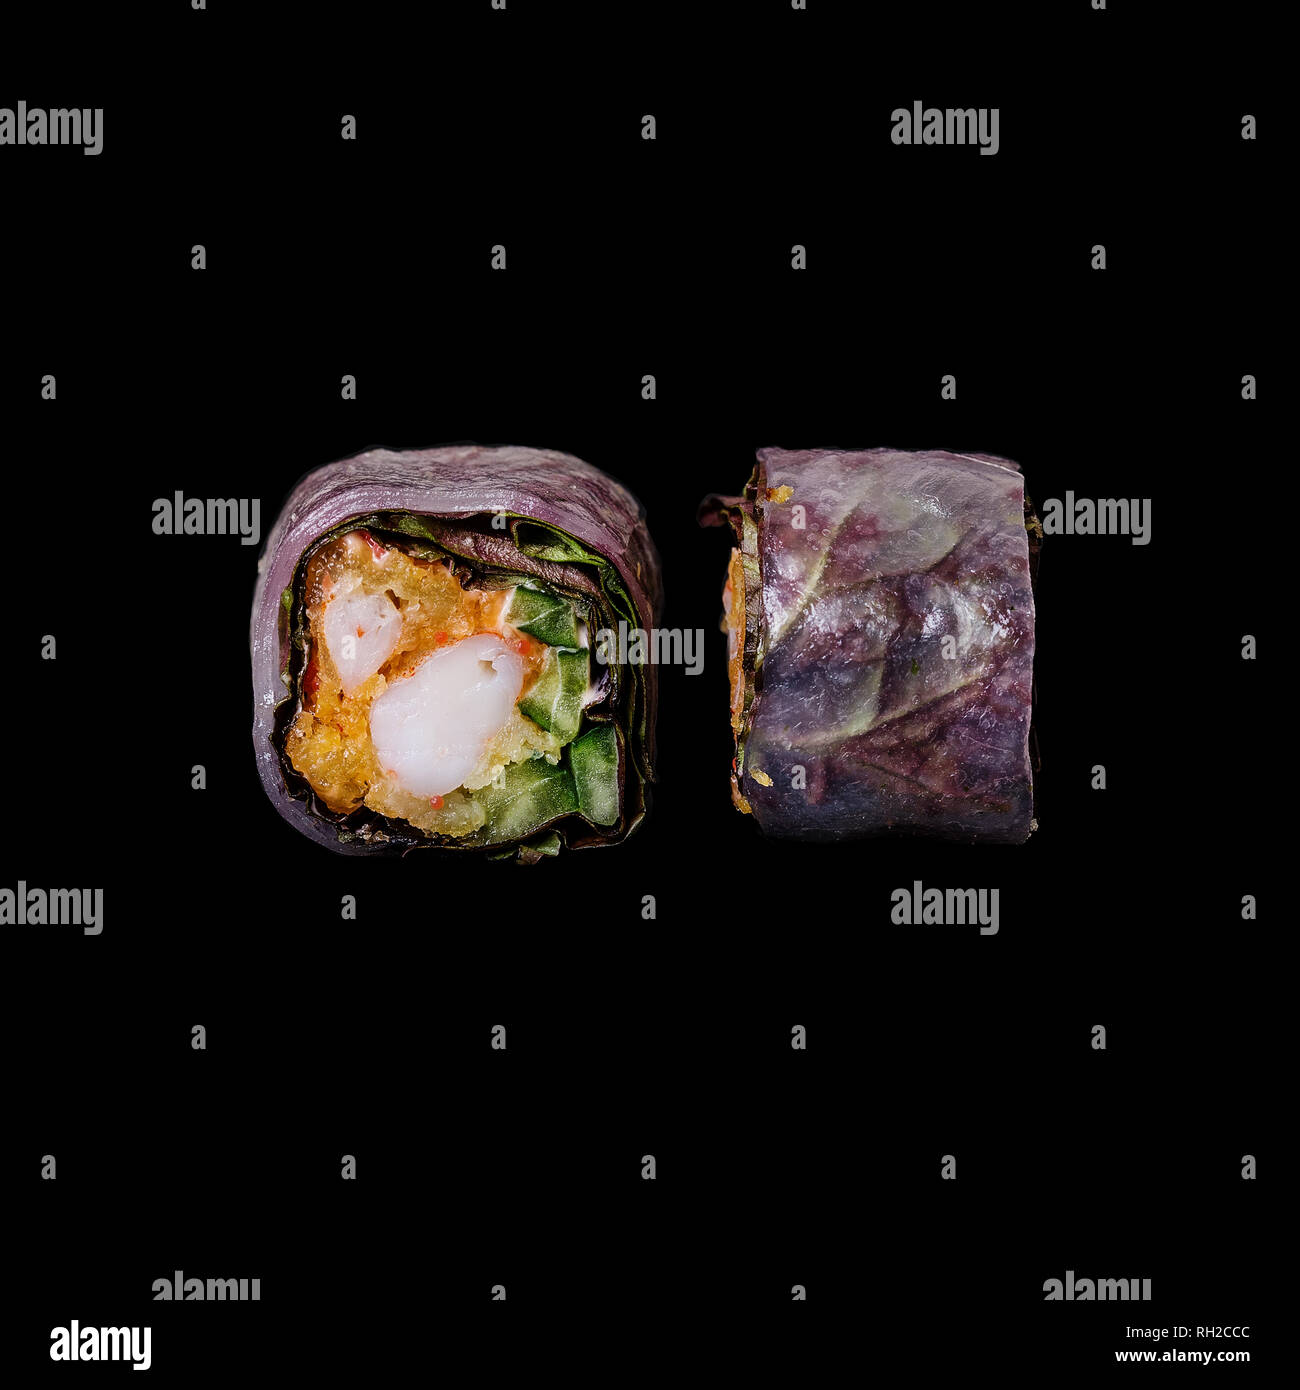 https://c8.alamy.com/comp/RH2CCC/sushi-roll-in-rice-paper-with-crispy-shrimp-tempura-cucumber-and-lola-ross-isolated-in-black-background-RH2CCC.jpg